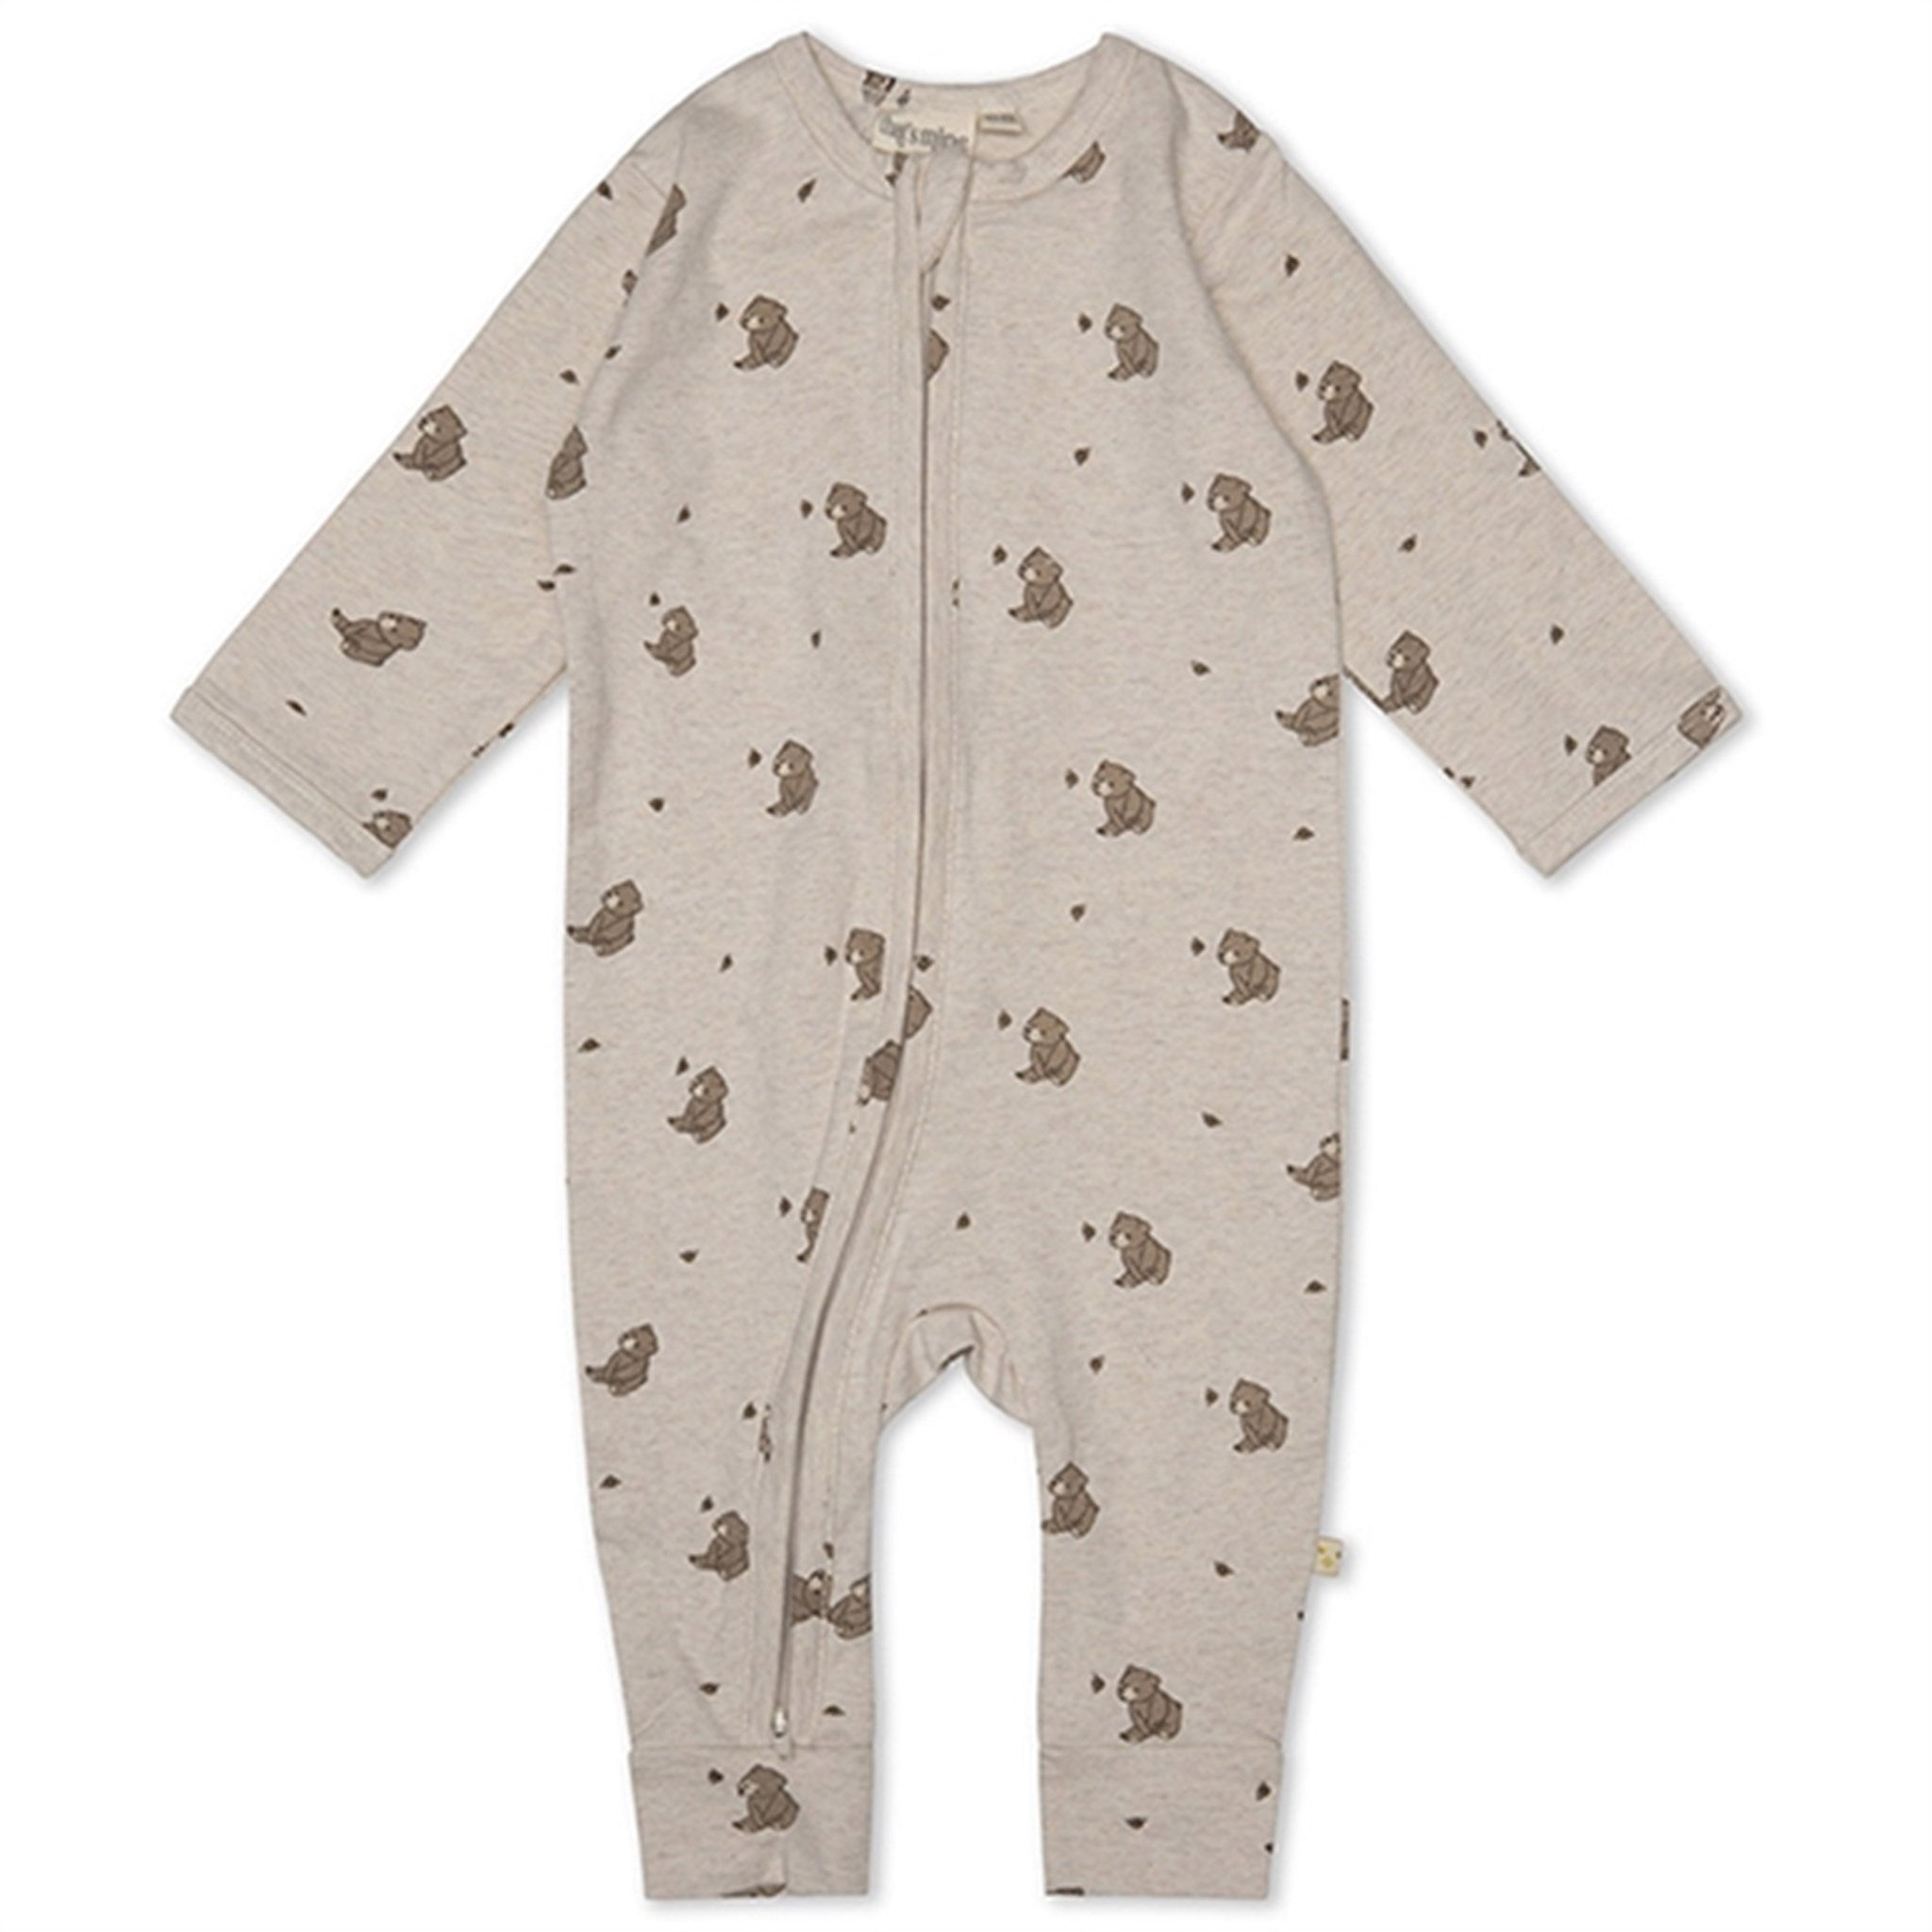 That's Mine Bees and Bears Mathie Onesie